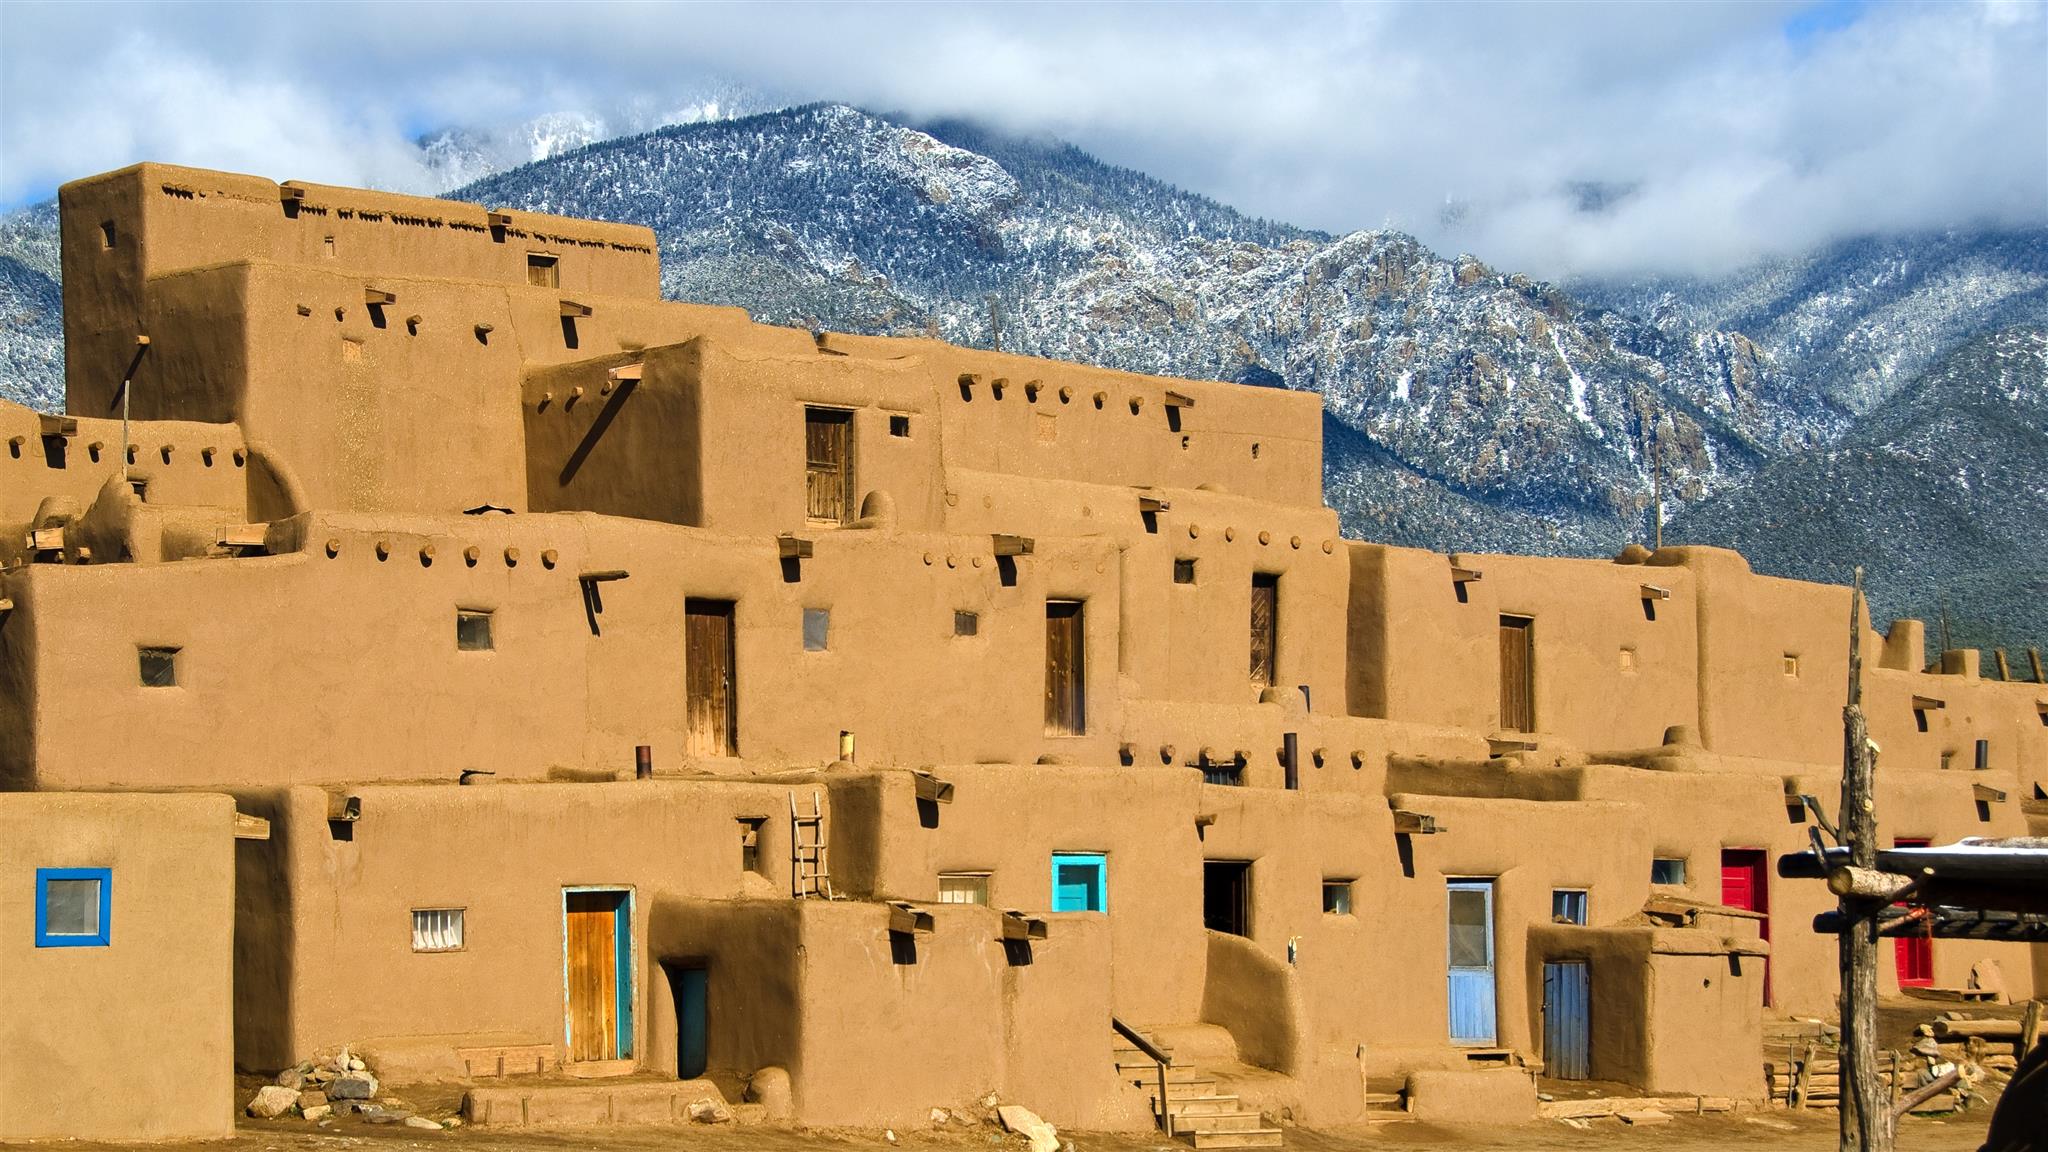 Need treatment nearby in Taos, New Mexico? Choose a drug/alcohol rehab center from our list, or call our hotline now for free help.